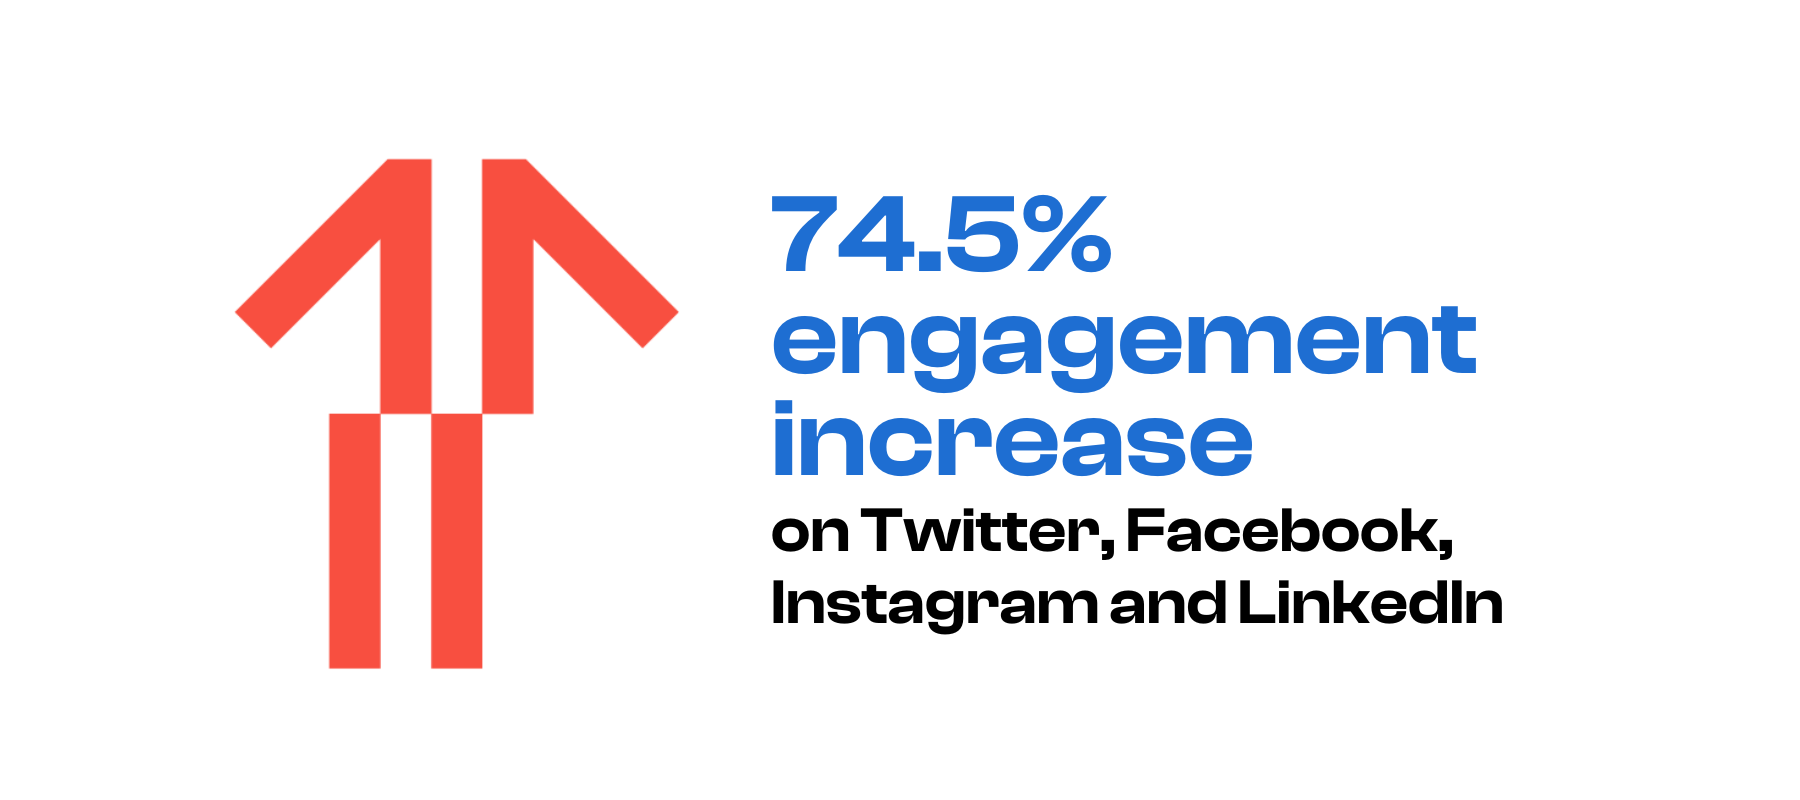 Overall engagement increase for Lot Fourteen